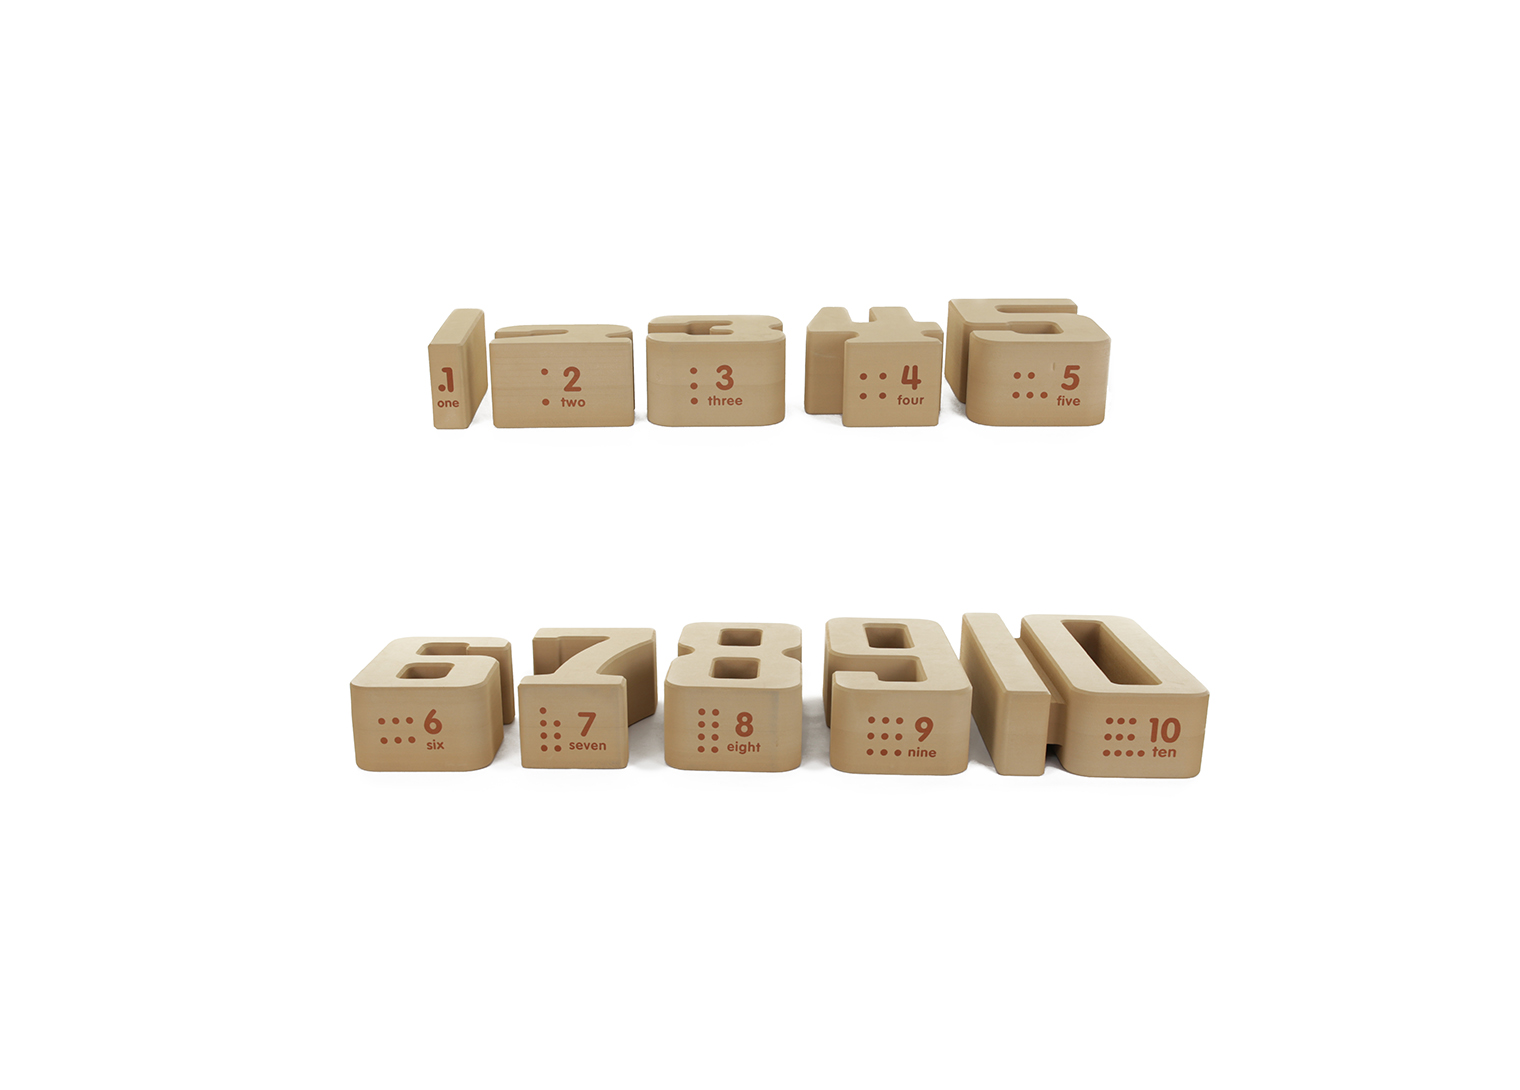 Giant Soft Numbers Learning Block Set 37 Piece